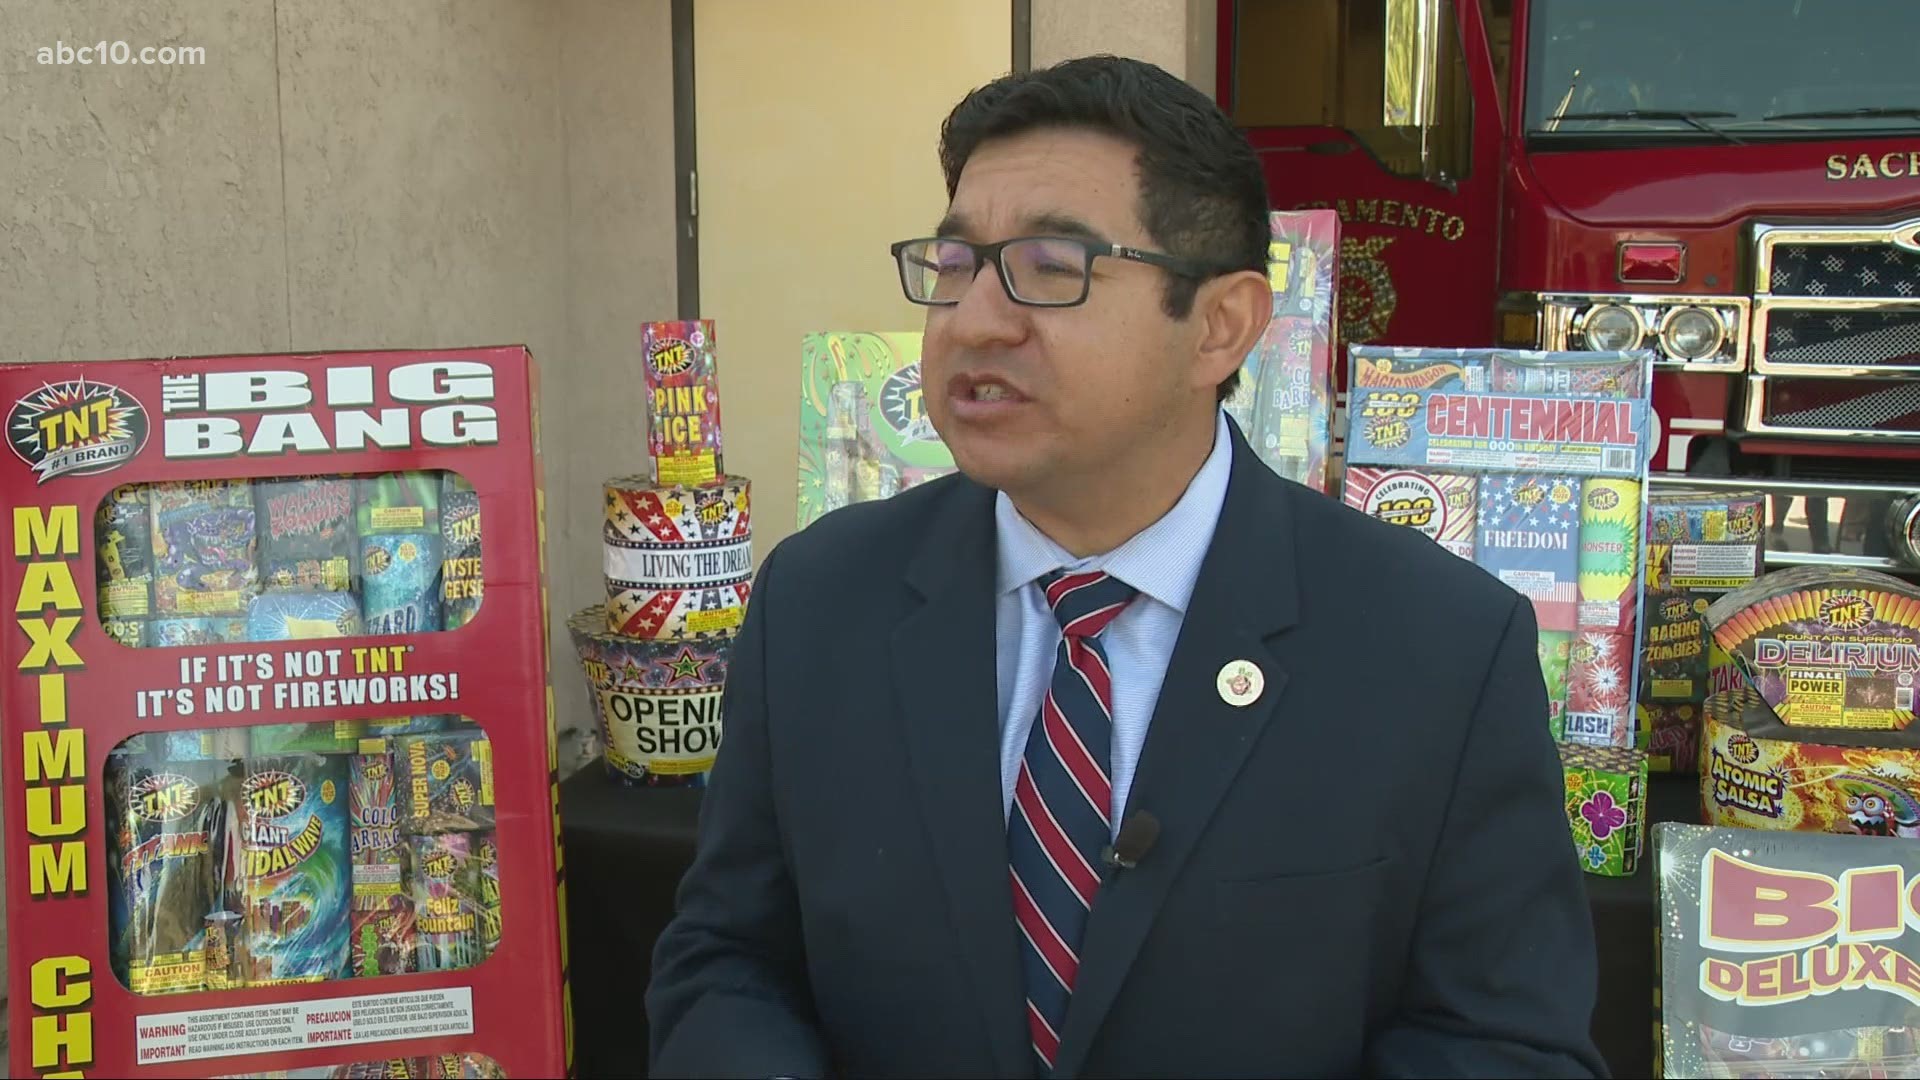 Monica Coleman explains how much you will be fined if you're caught using illegal fireworks.